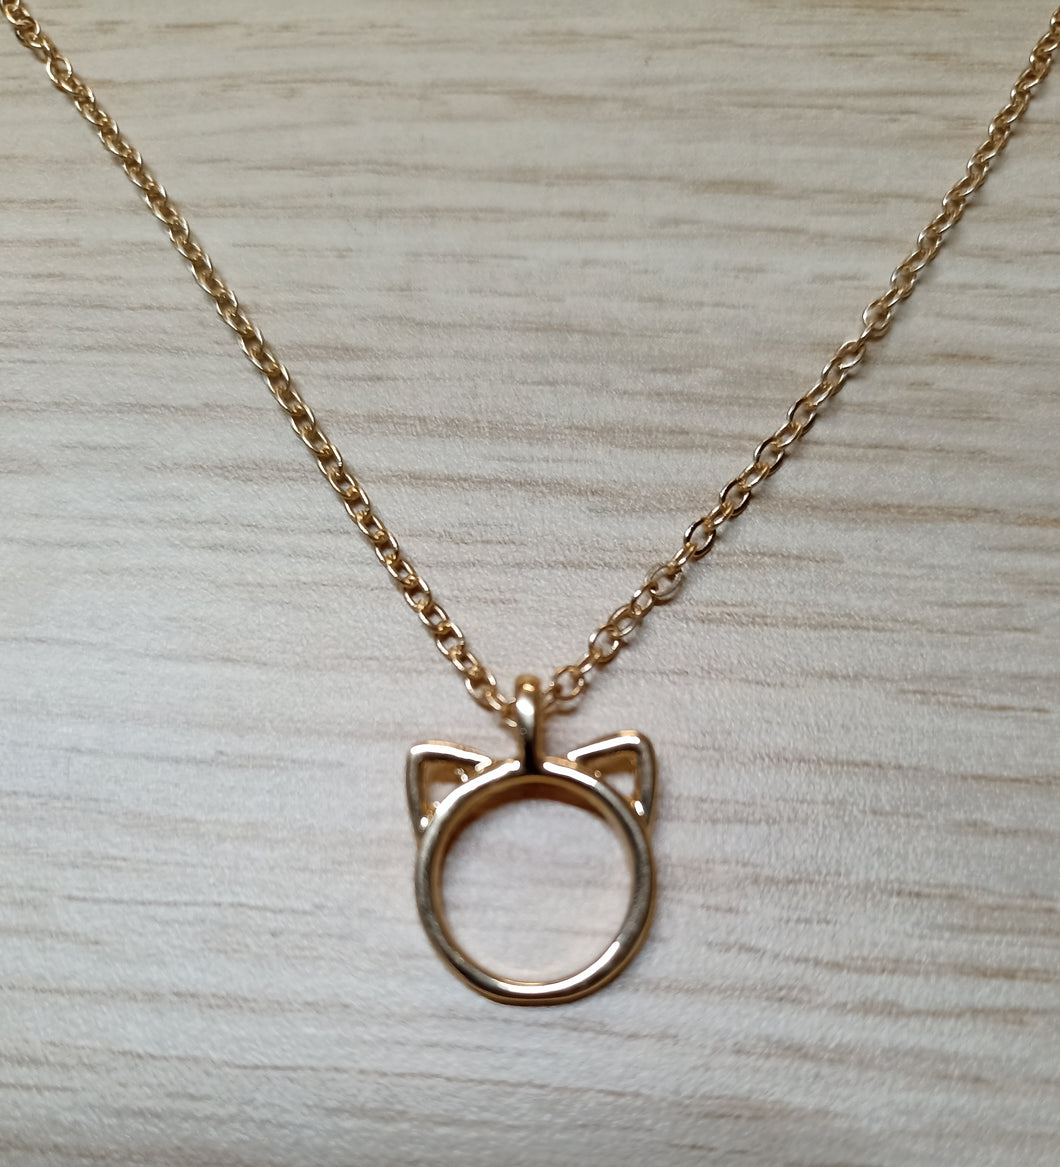 Purrfection Gold Necklace